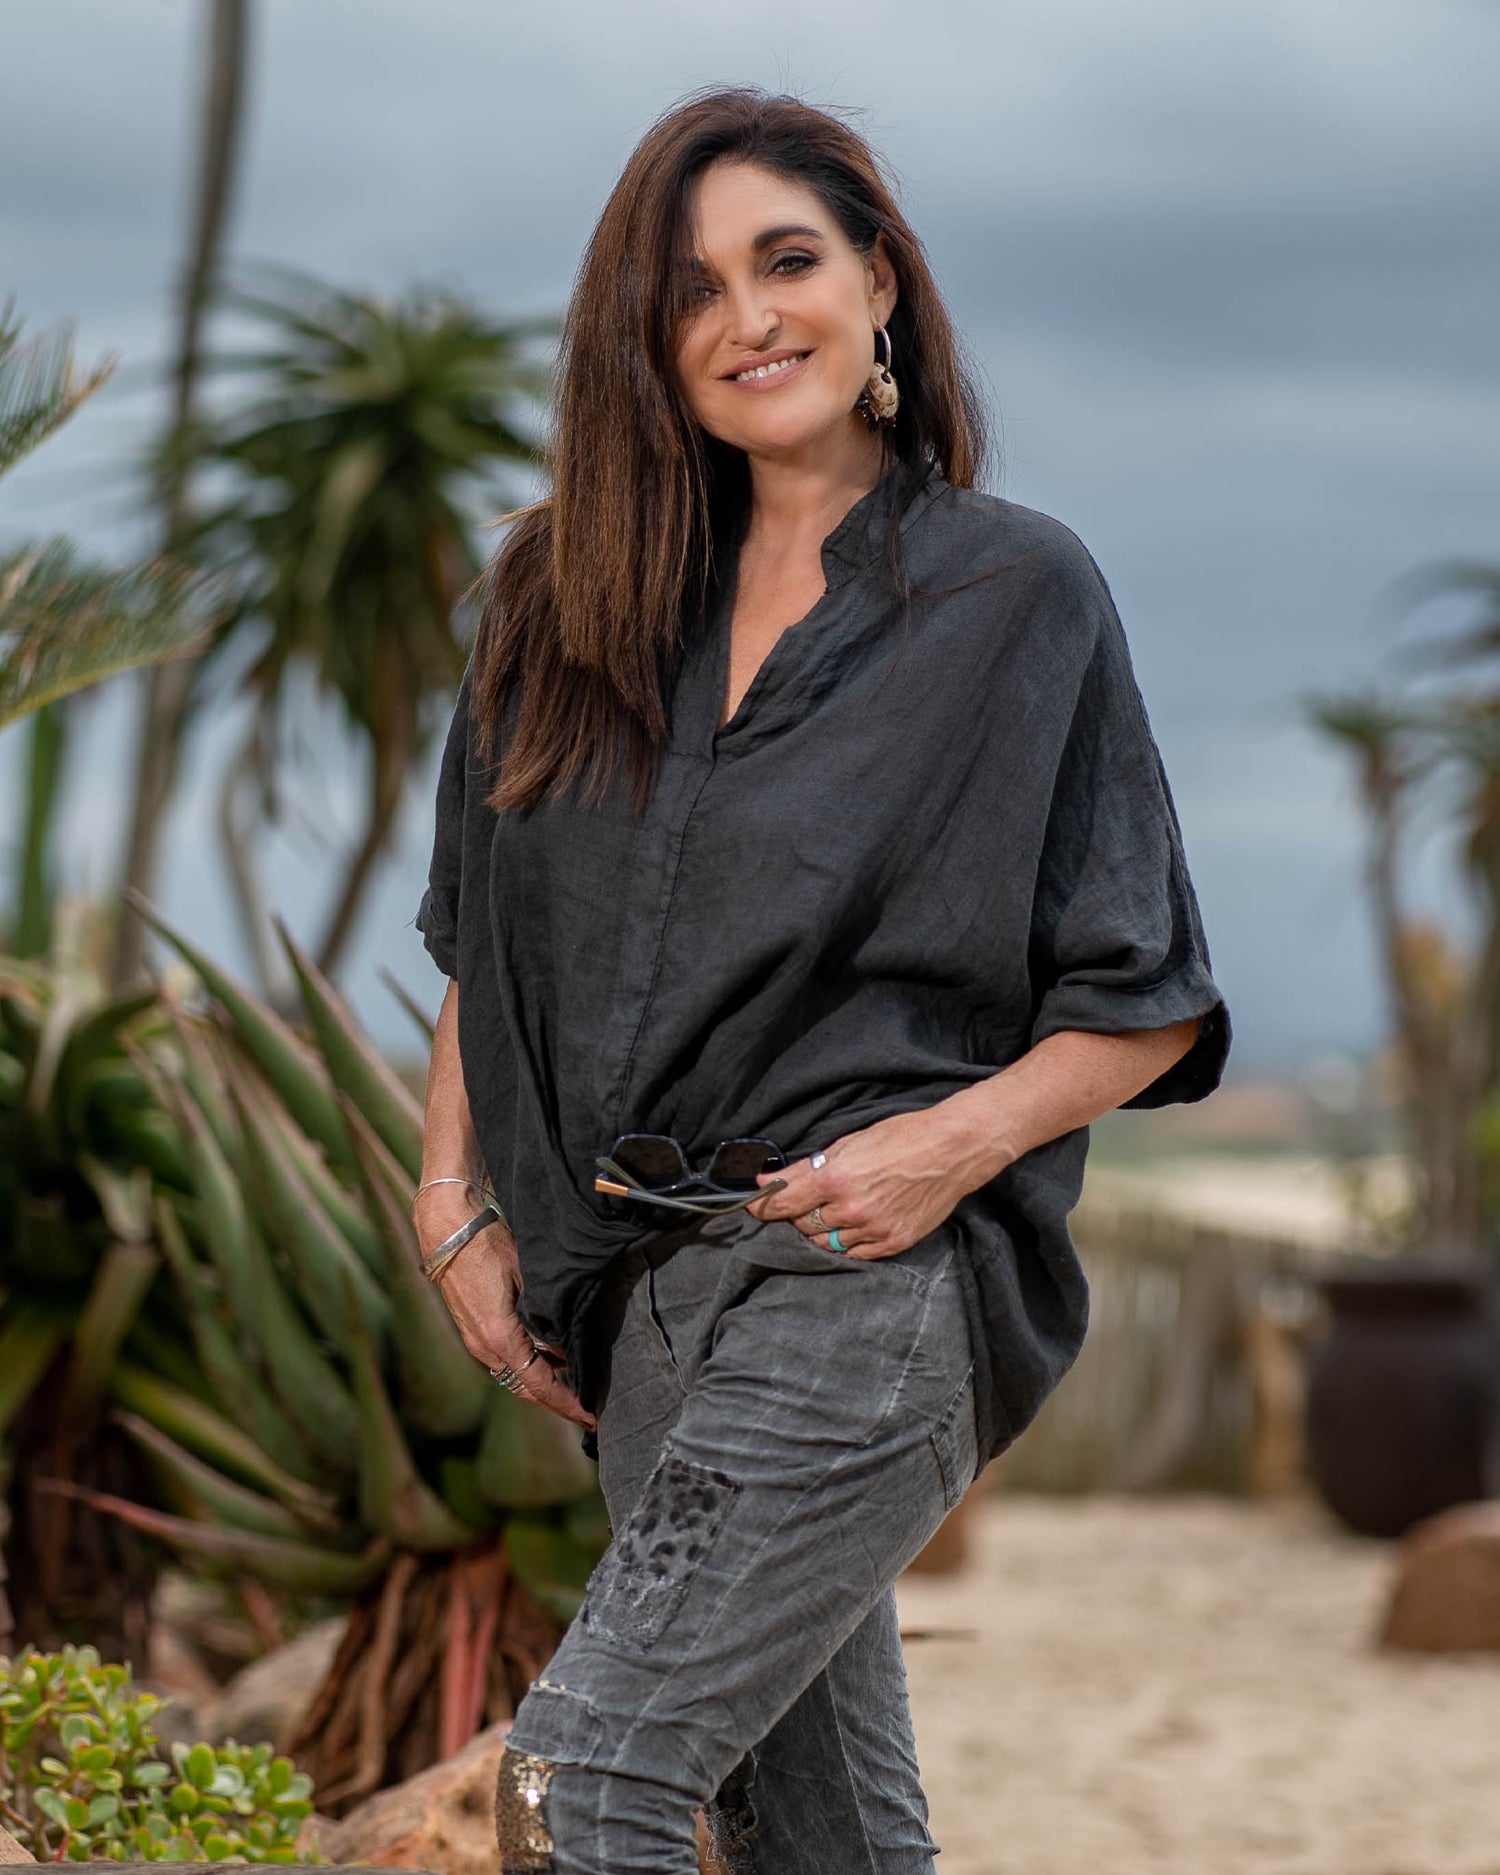 The subtle twist detail not only enhances the visual appeal but also provides a flattering fit, accentuating your waistline and creating a feminine, flowing effect. The batwing sleeves drape gracefully, creating a sense of airiness and movement. Whether you're heading to brunch, a beachside gathering, or a casual day out, this top effortlessly elevates your style